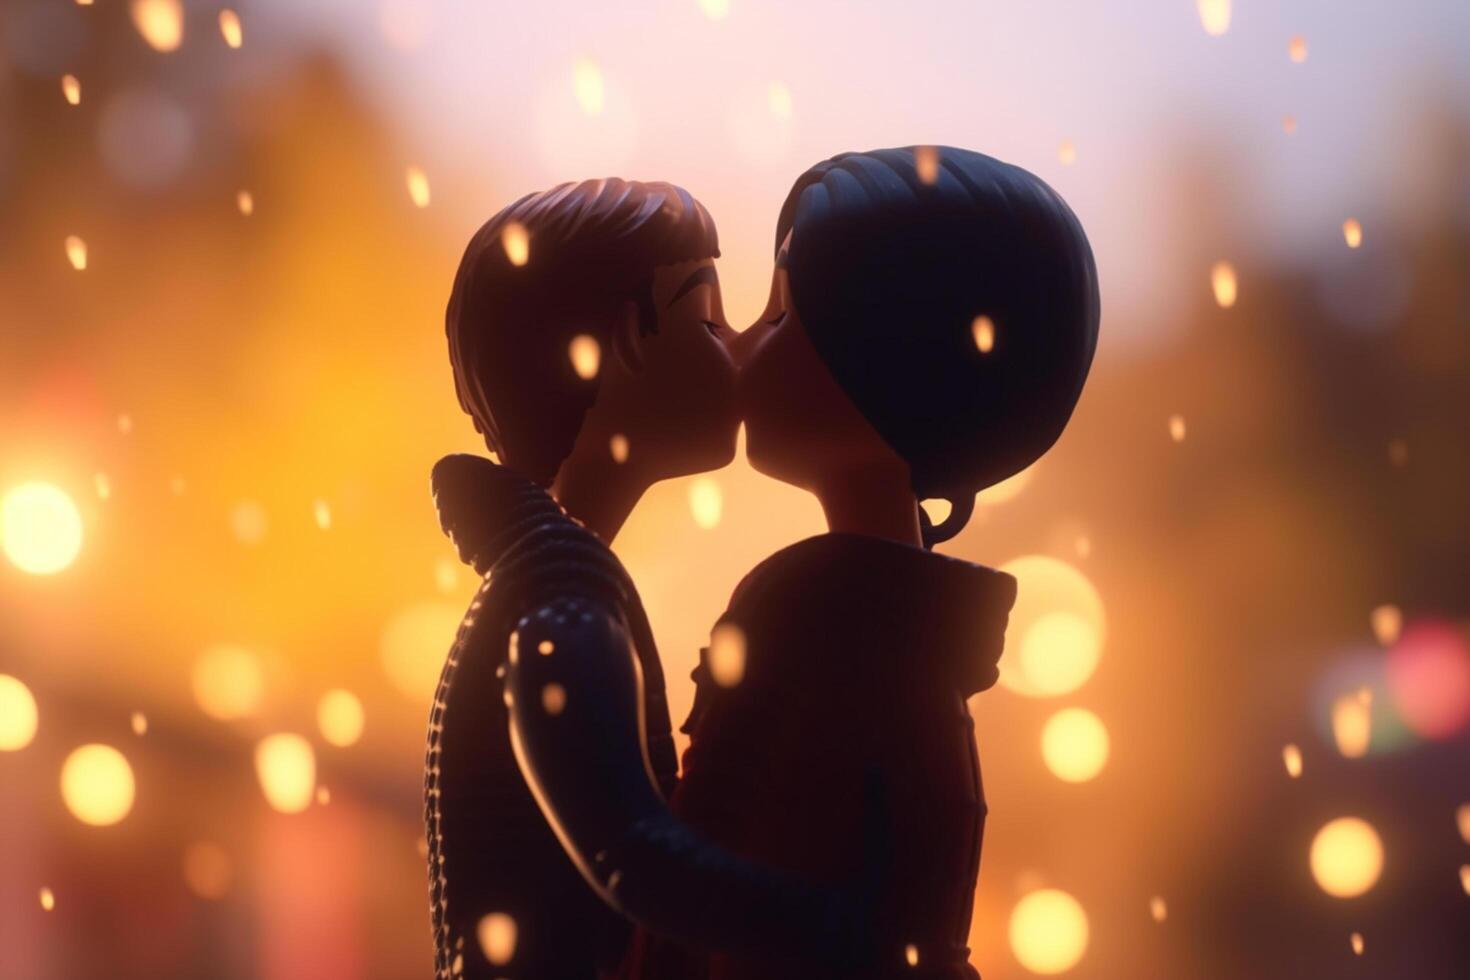 A Romantic Night Out Photorealistic Cartoon Couple Embracing and Kissing Under Festive Lights photo